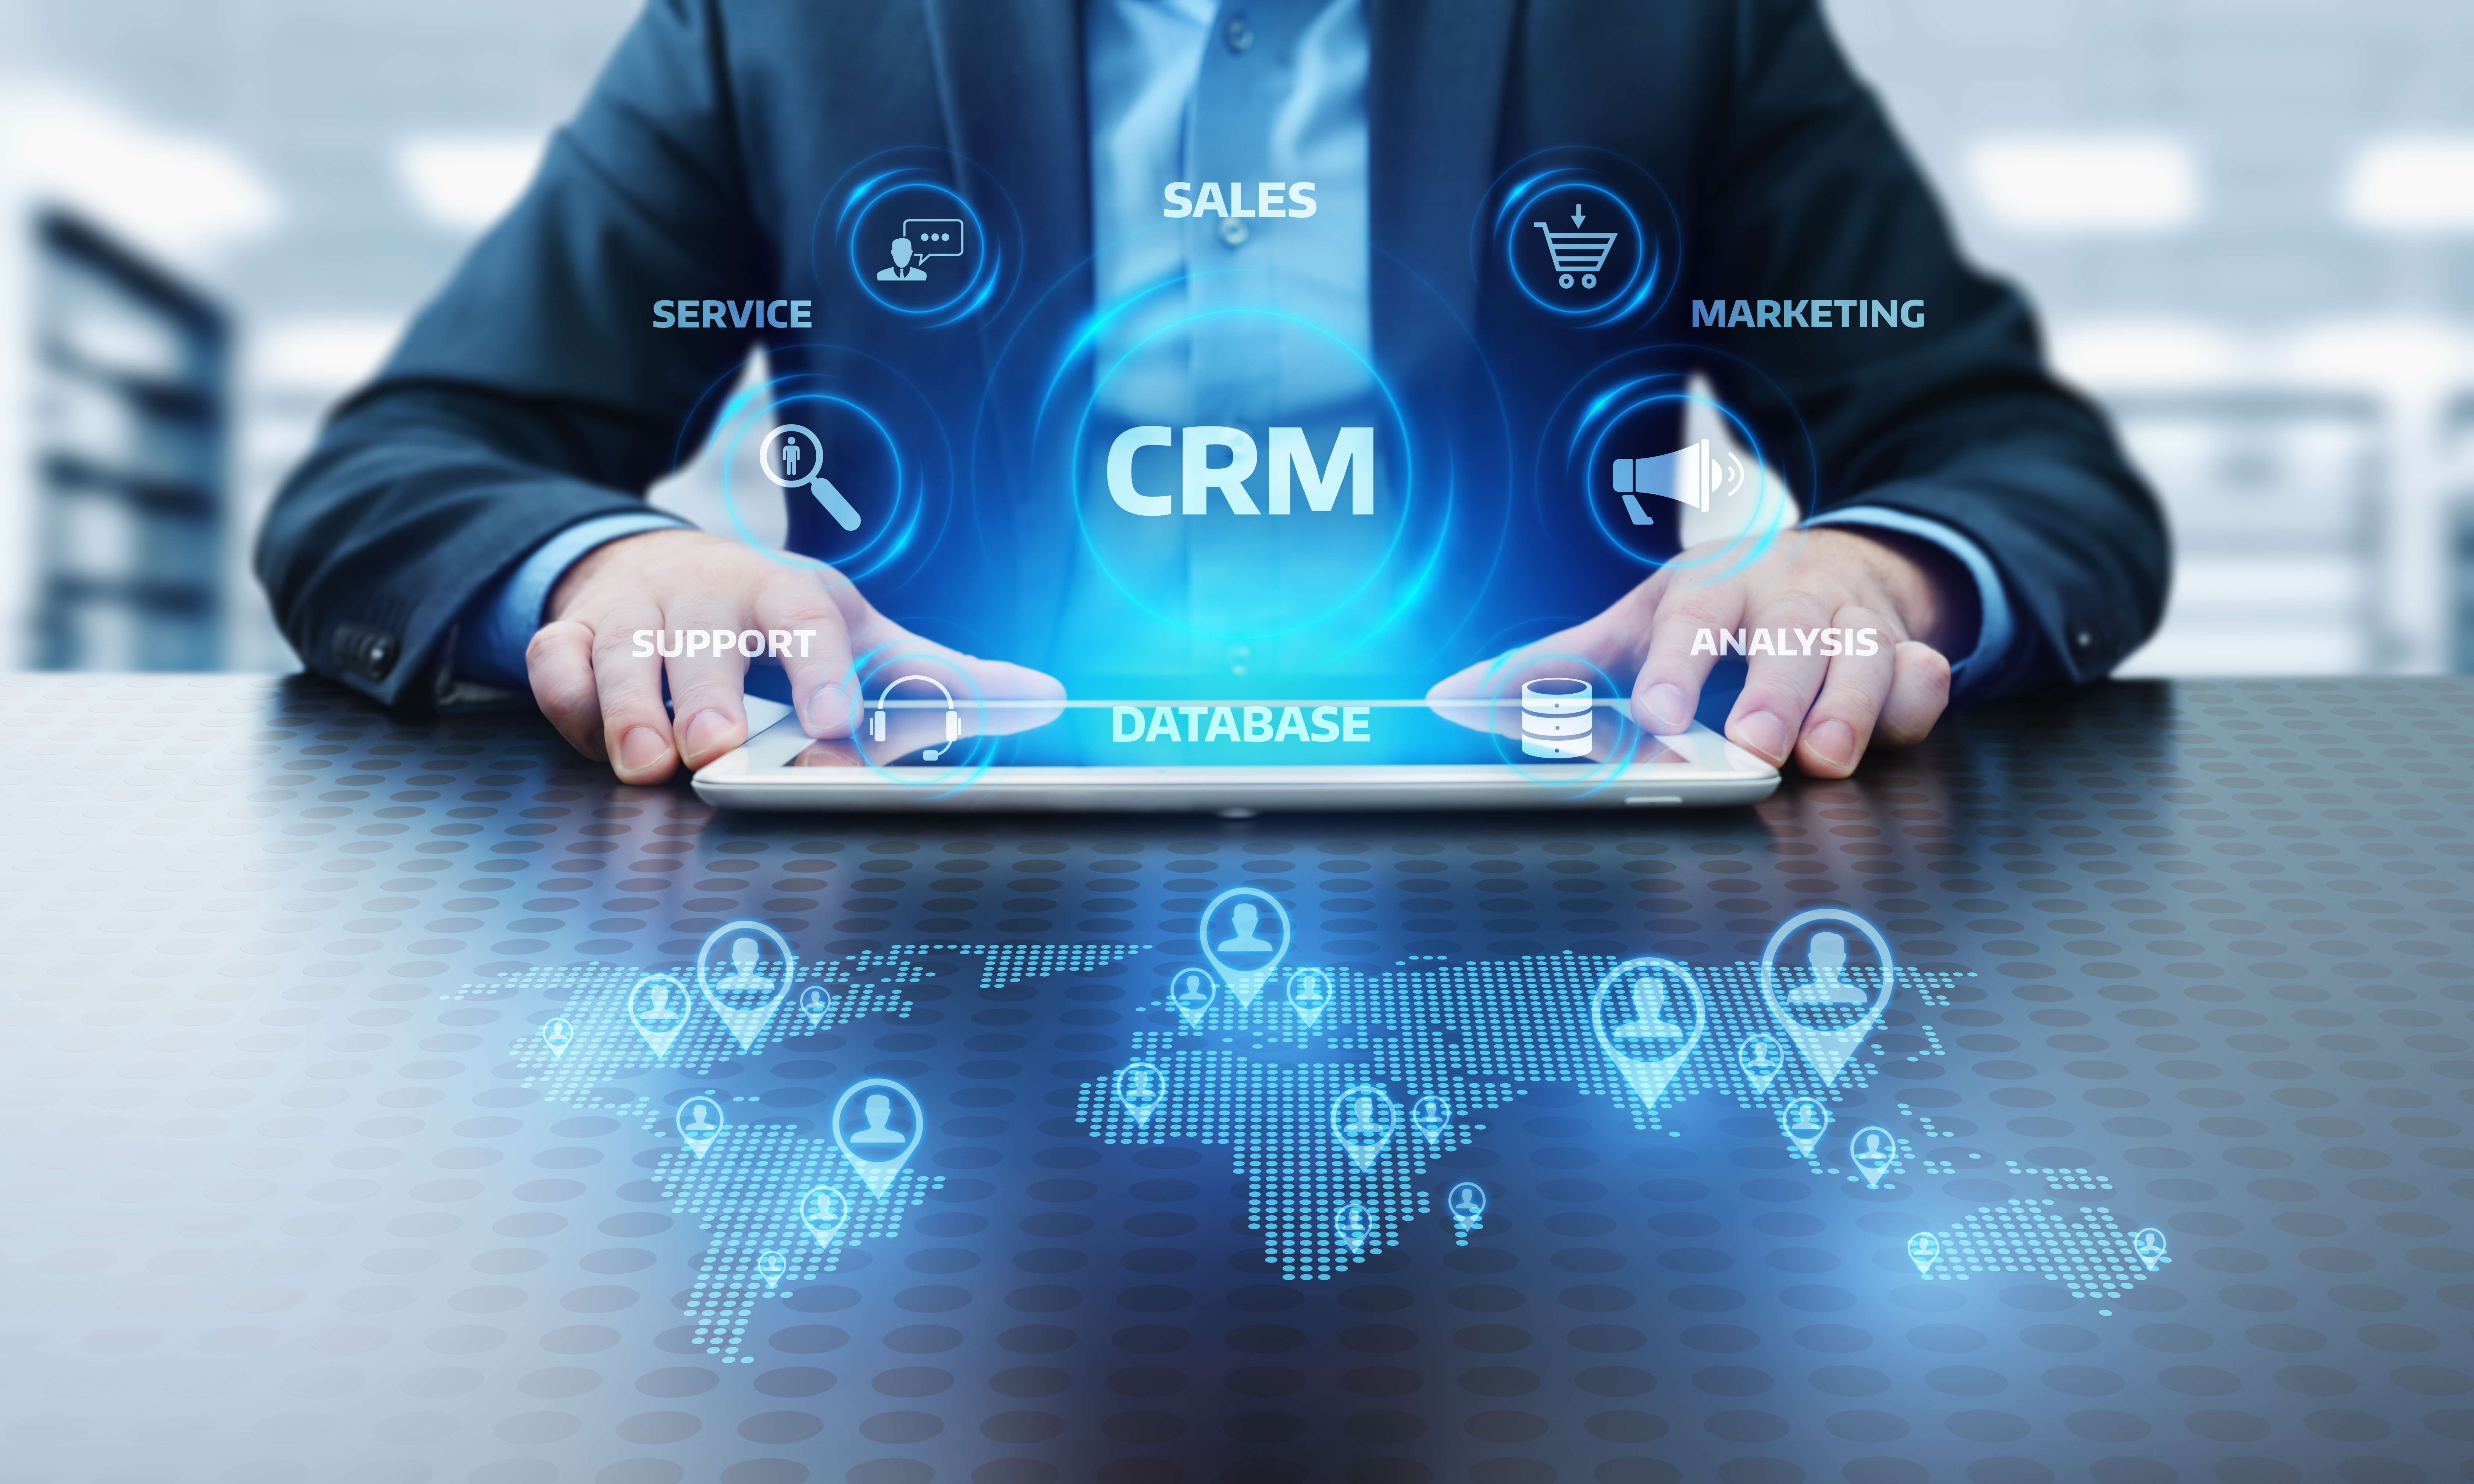 Tech image showing different attributes of a CRM